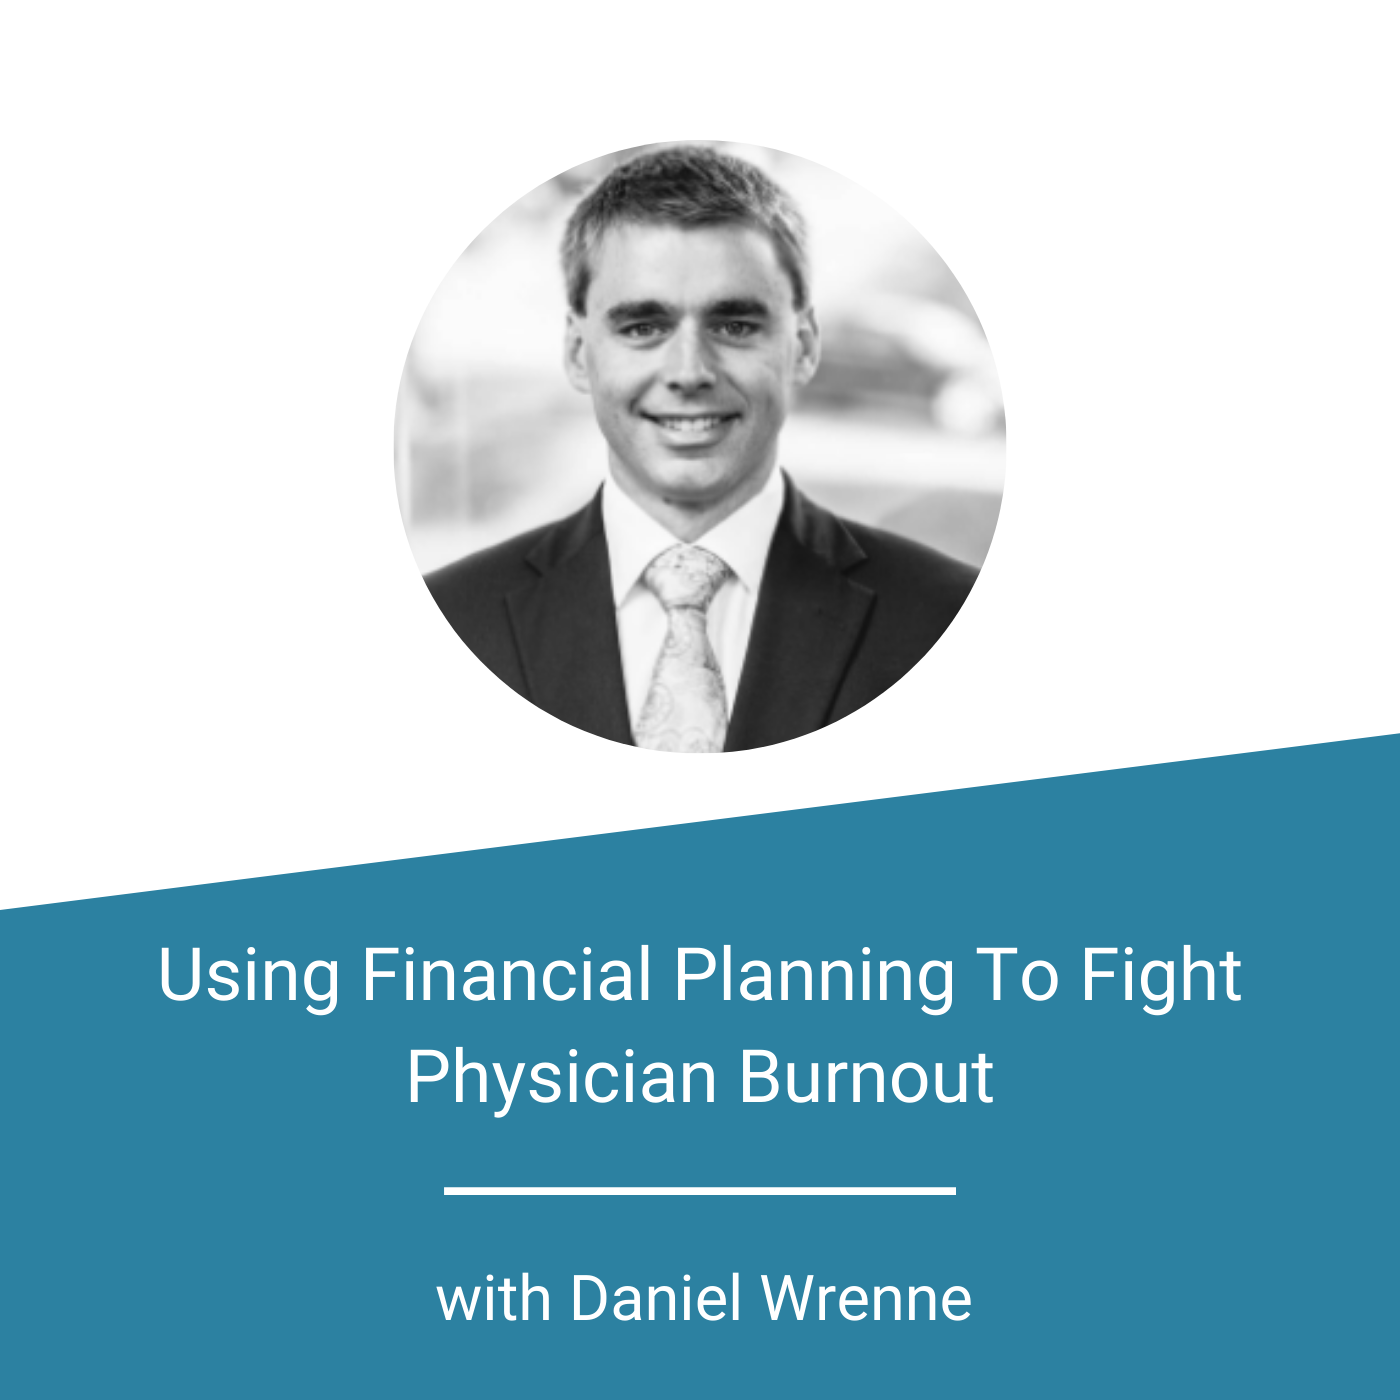 Featured Image - Using Financial Planning To Fight Physician Burnout